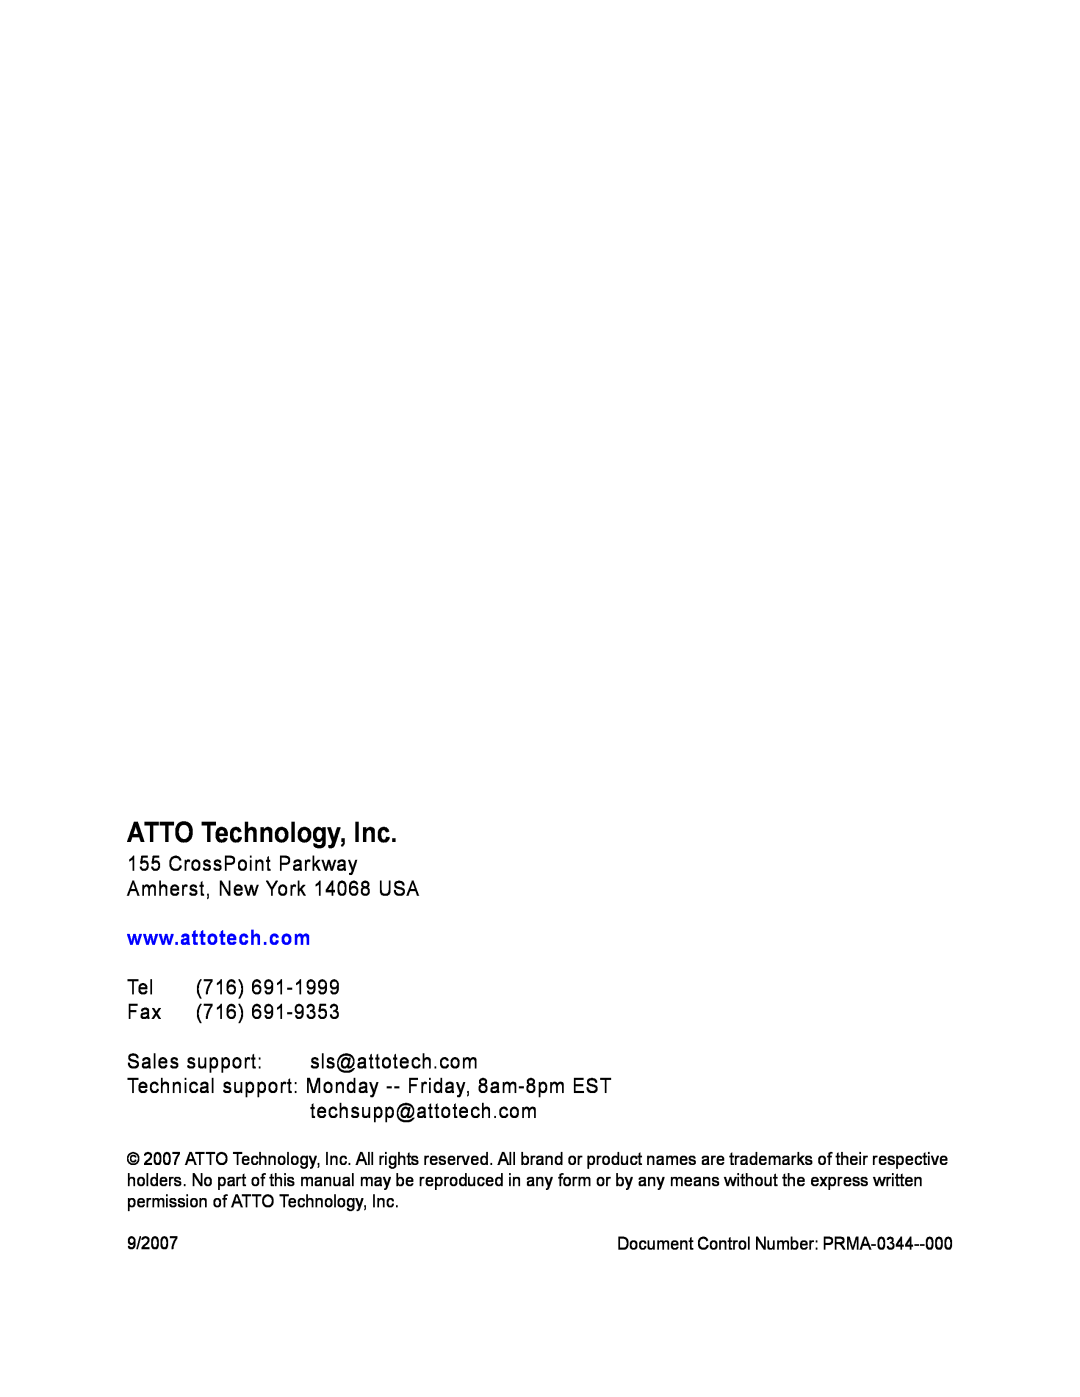 ATTO Technology FC-41ES, FC-21PS ATTO Technology, Inc, CrossPoint Parkway Amherst, New York 14068 USA, Sales support 